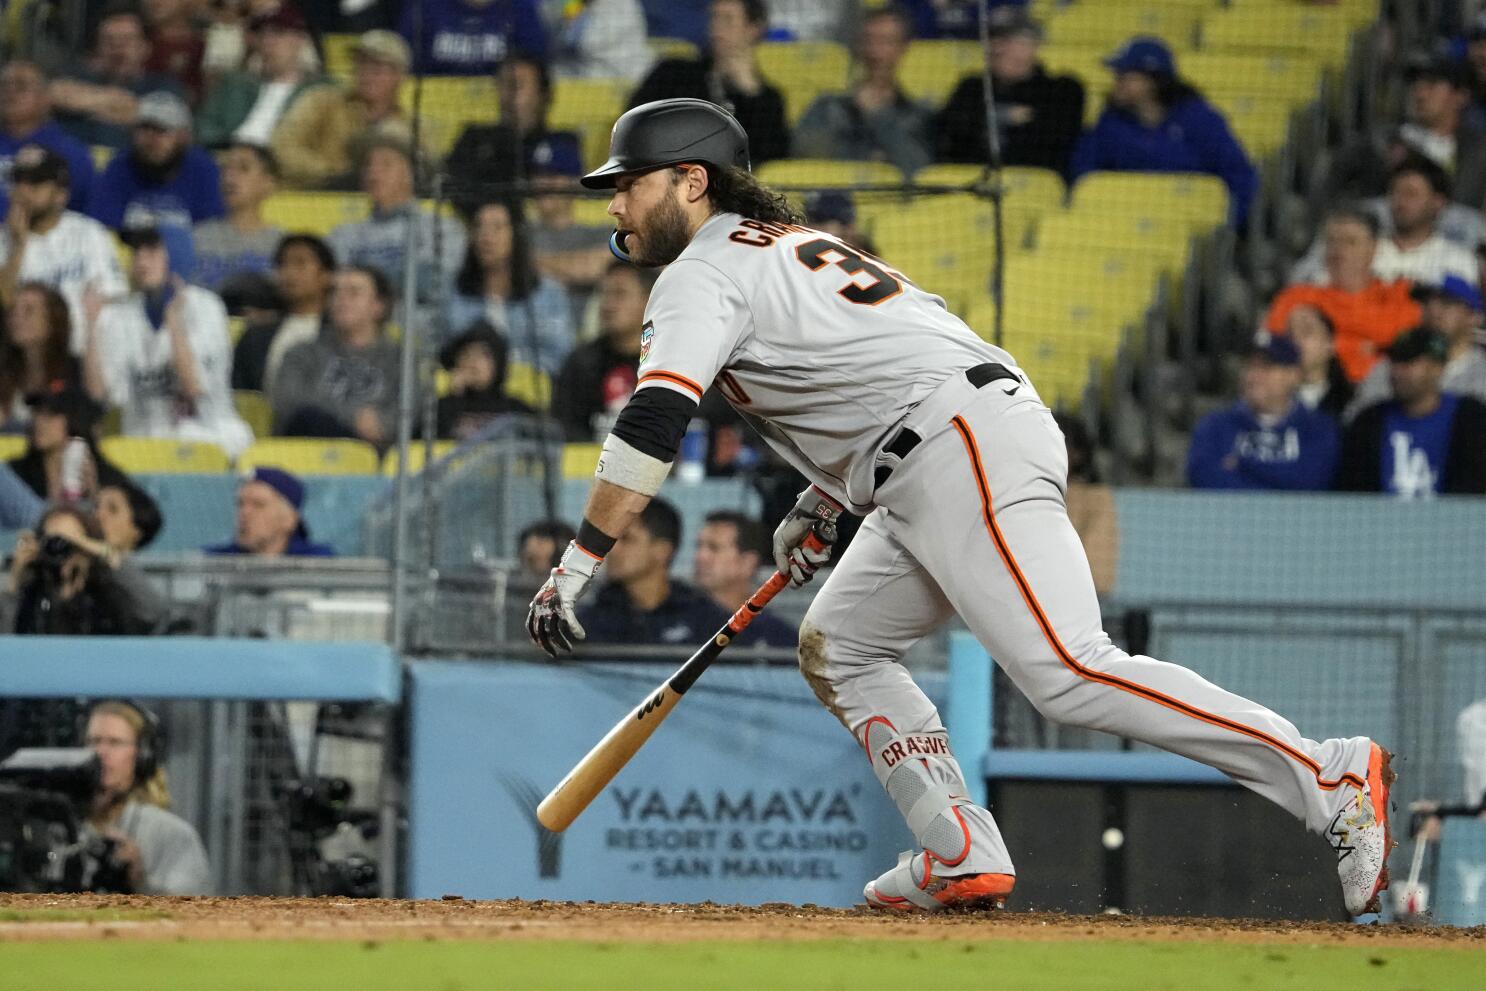 Giants rally for 7-5 win over Dodgers after getting no-hit for 6